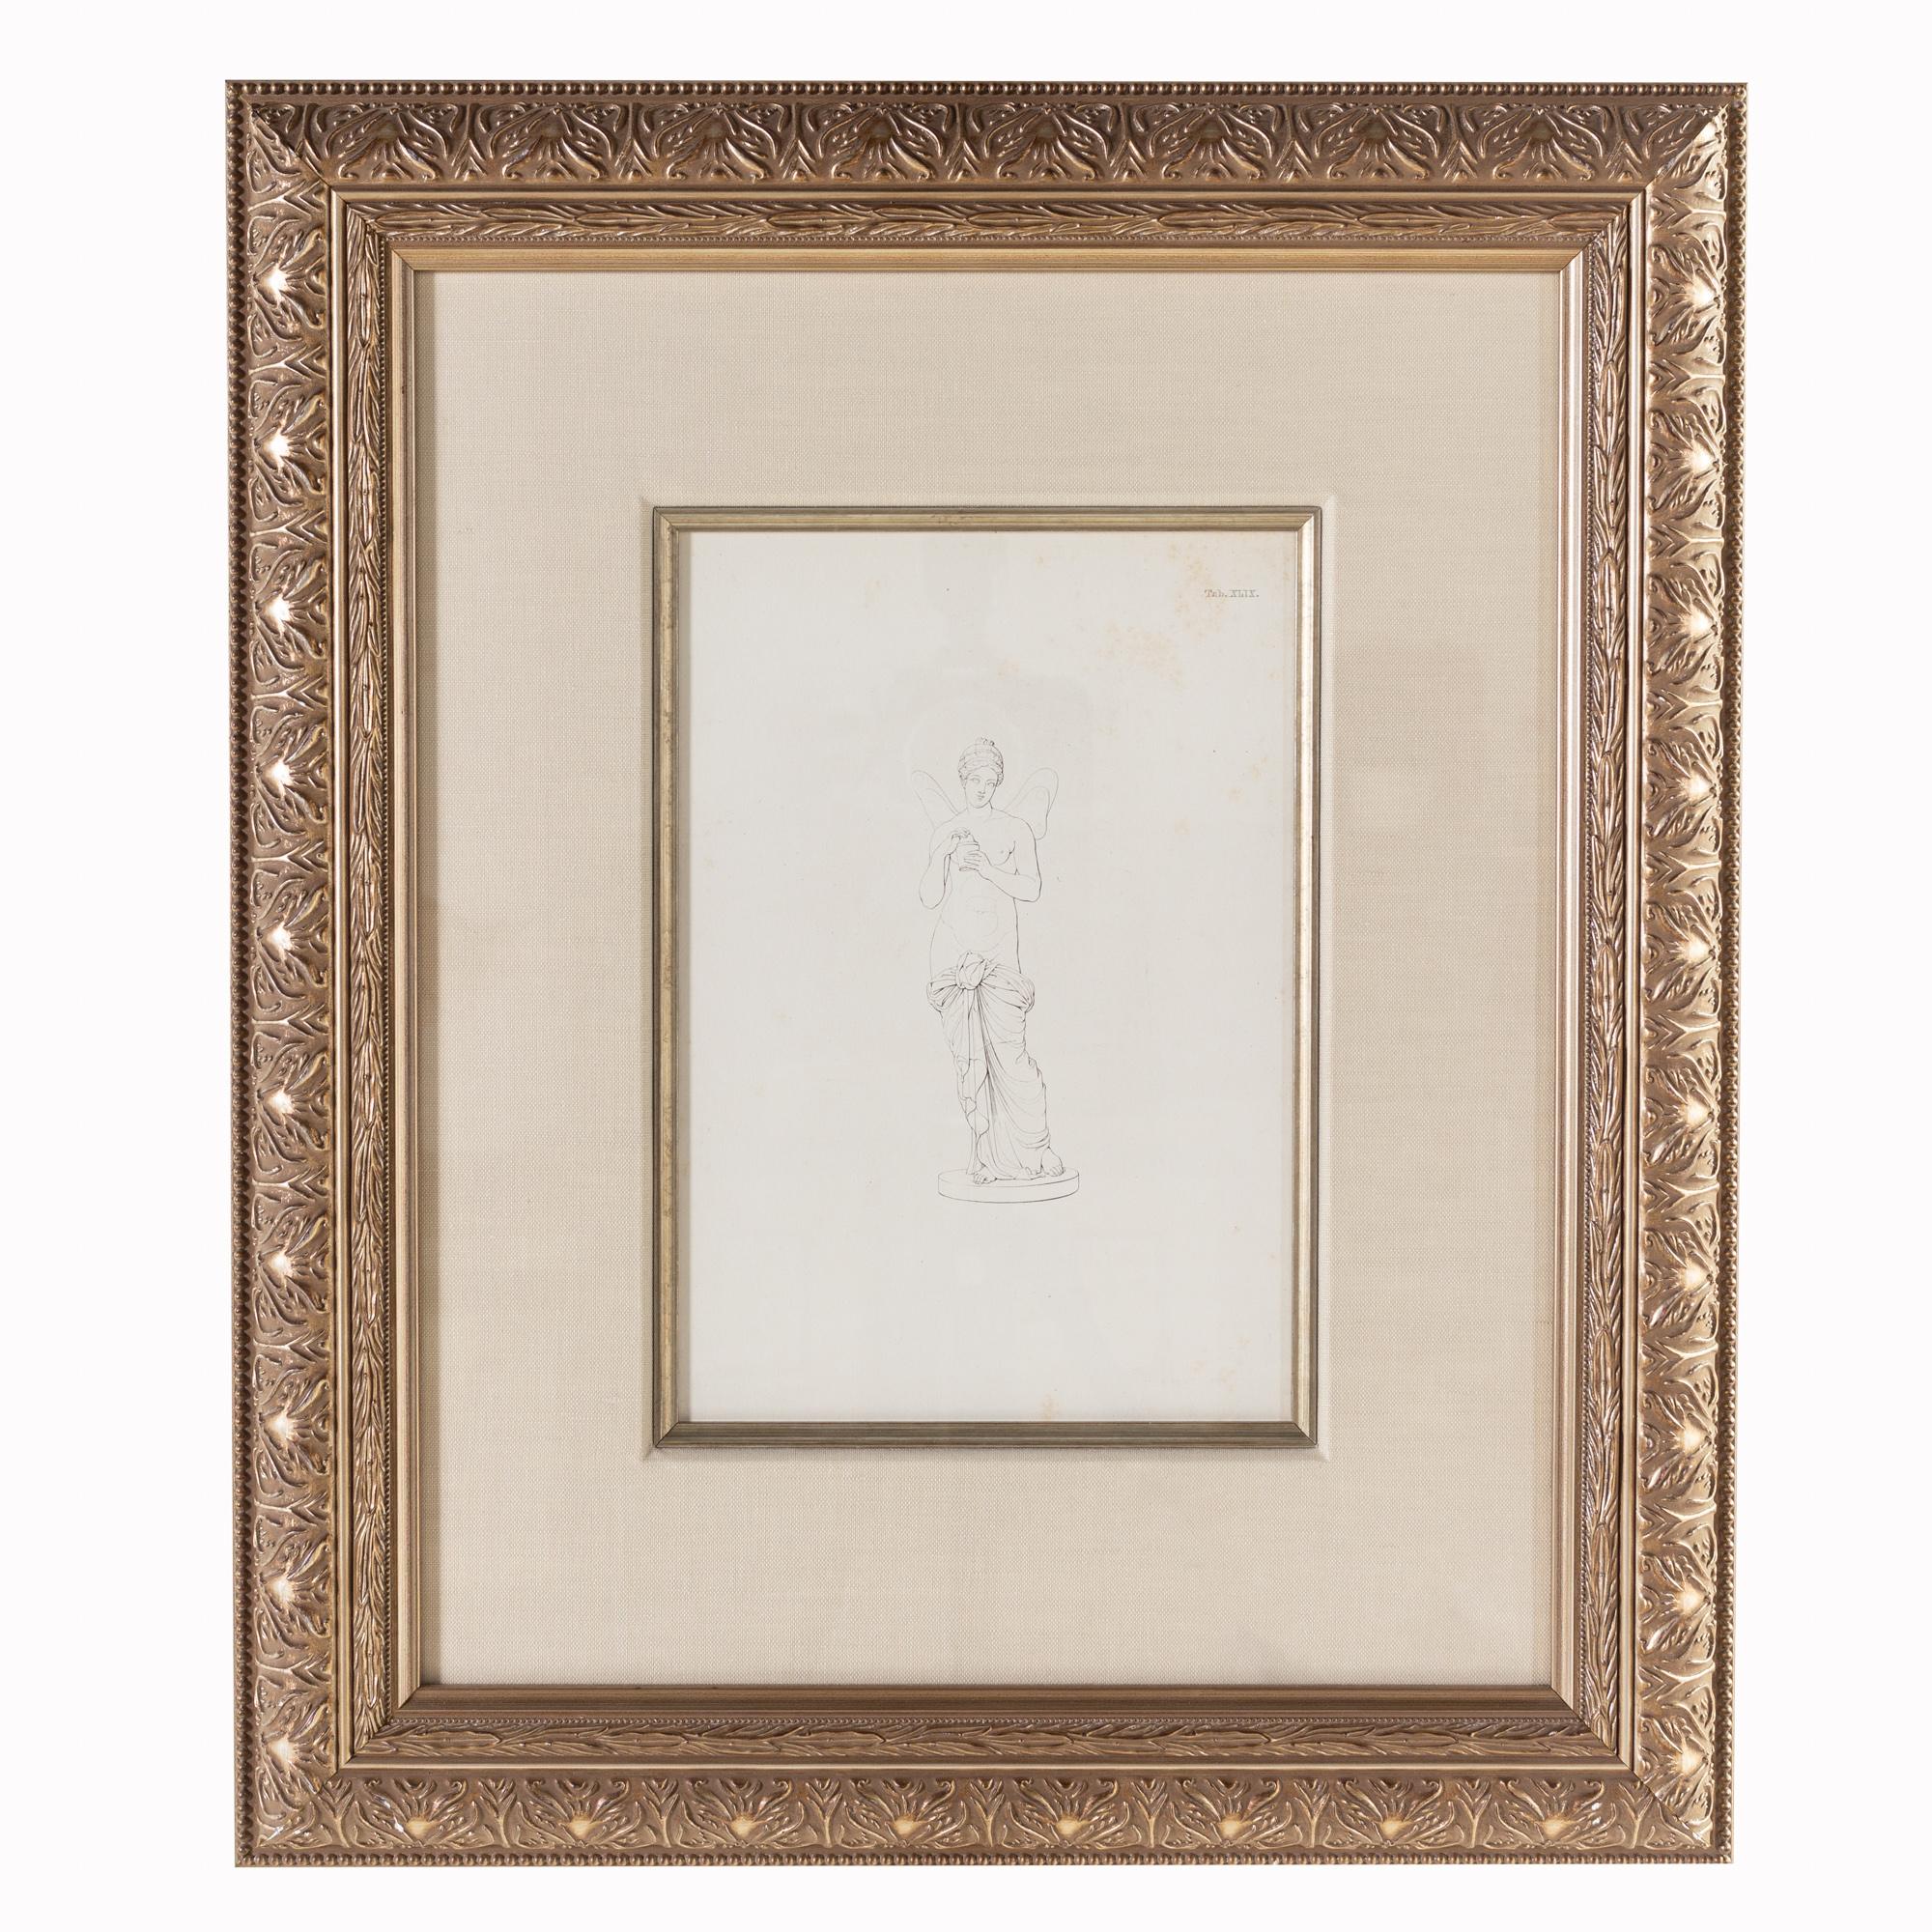 Pencil drawing of women gold framed

This print measures: 19 wide x 1.5 deep x 23 inches high

This print is in great vintage condition with minor marks, dents, and wear.

We take our photos in a controlled lighting studio to show as much